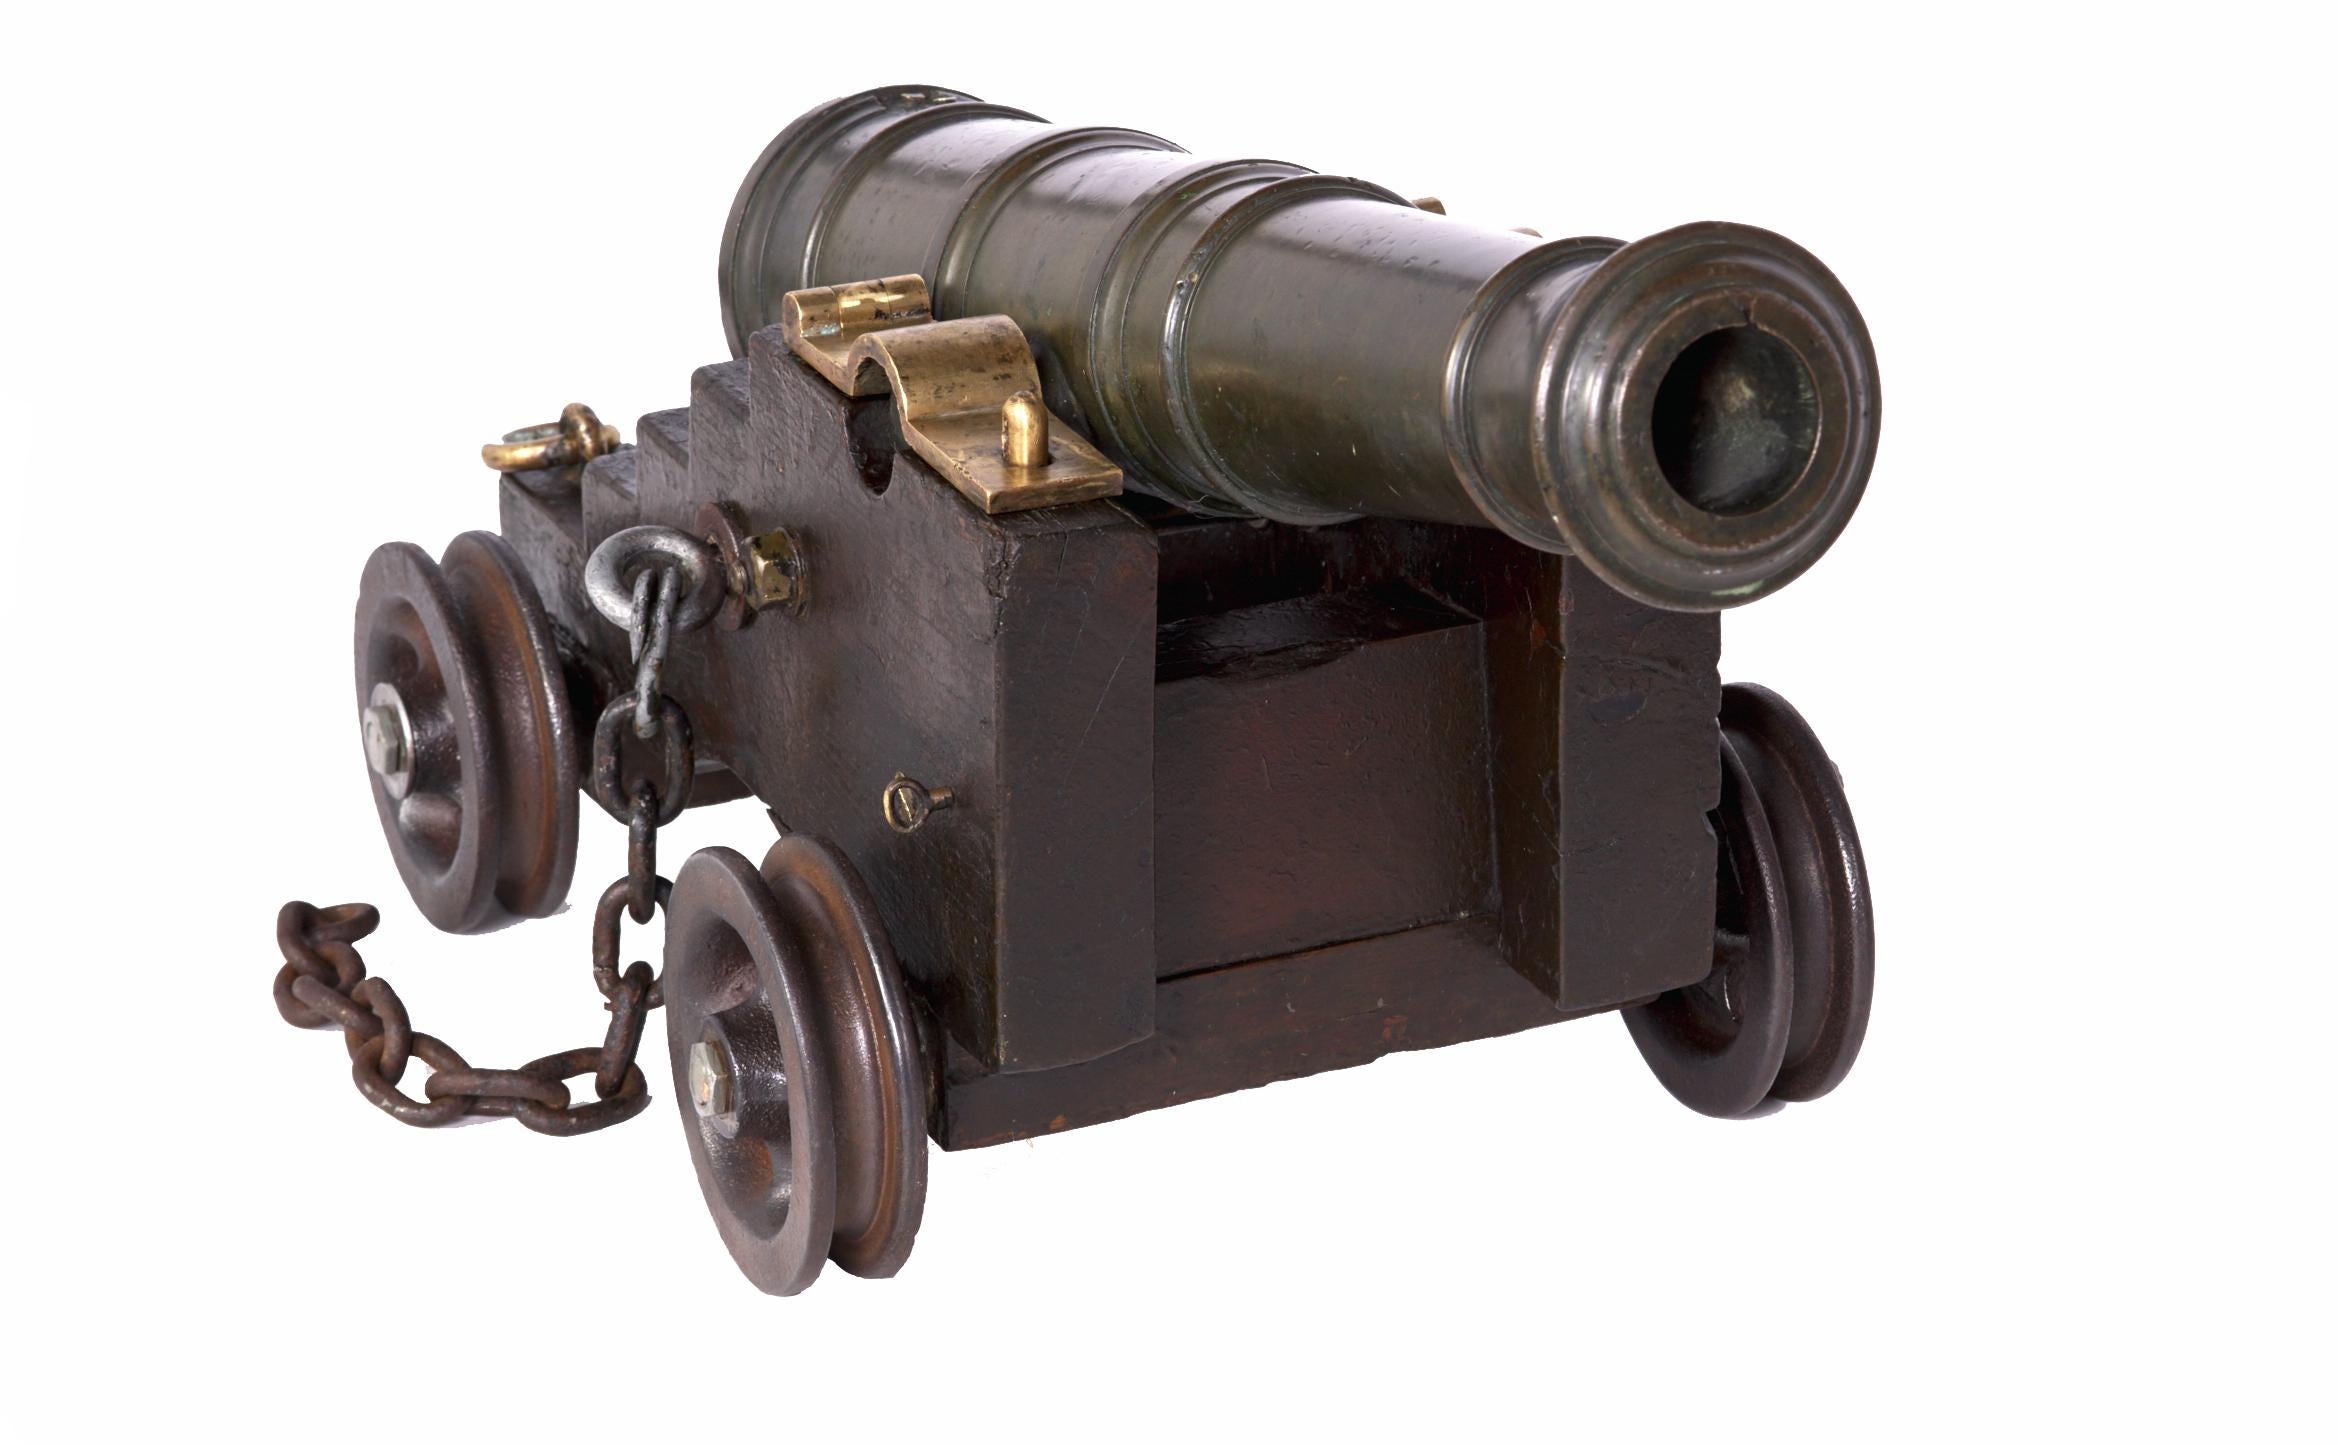 Love this beauty a real antique solid bronze cannon with carriage in superb working order. Though it could be used as one it is large for use as a signal cannon. Designed as a small working cannon to shoot ball or shot unusual to have the heavy iron